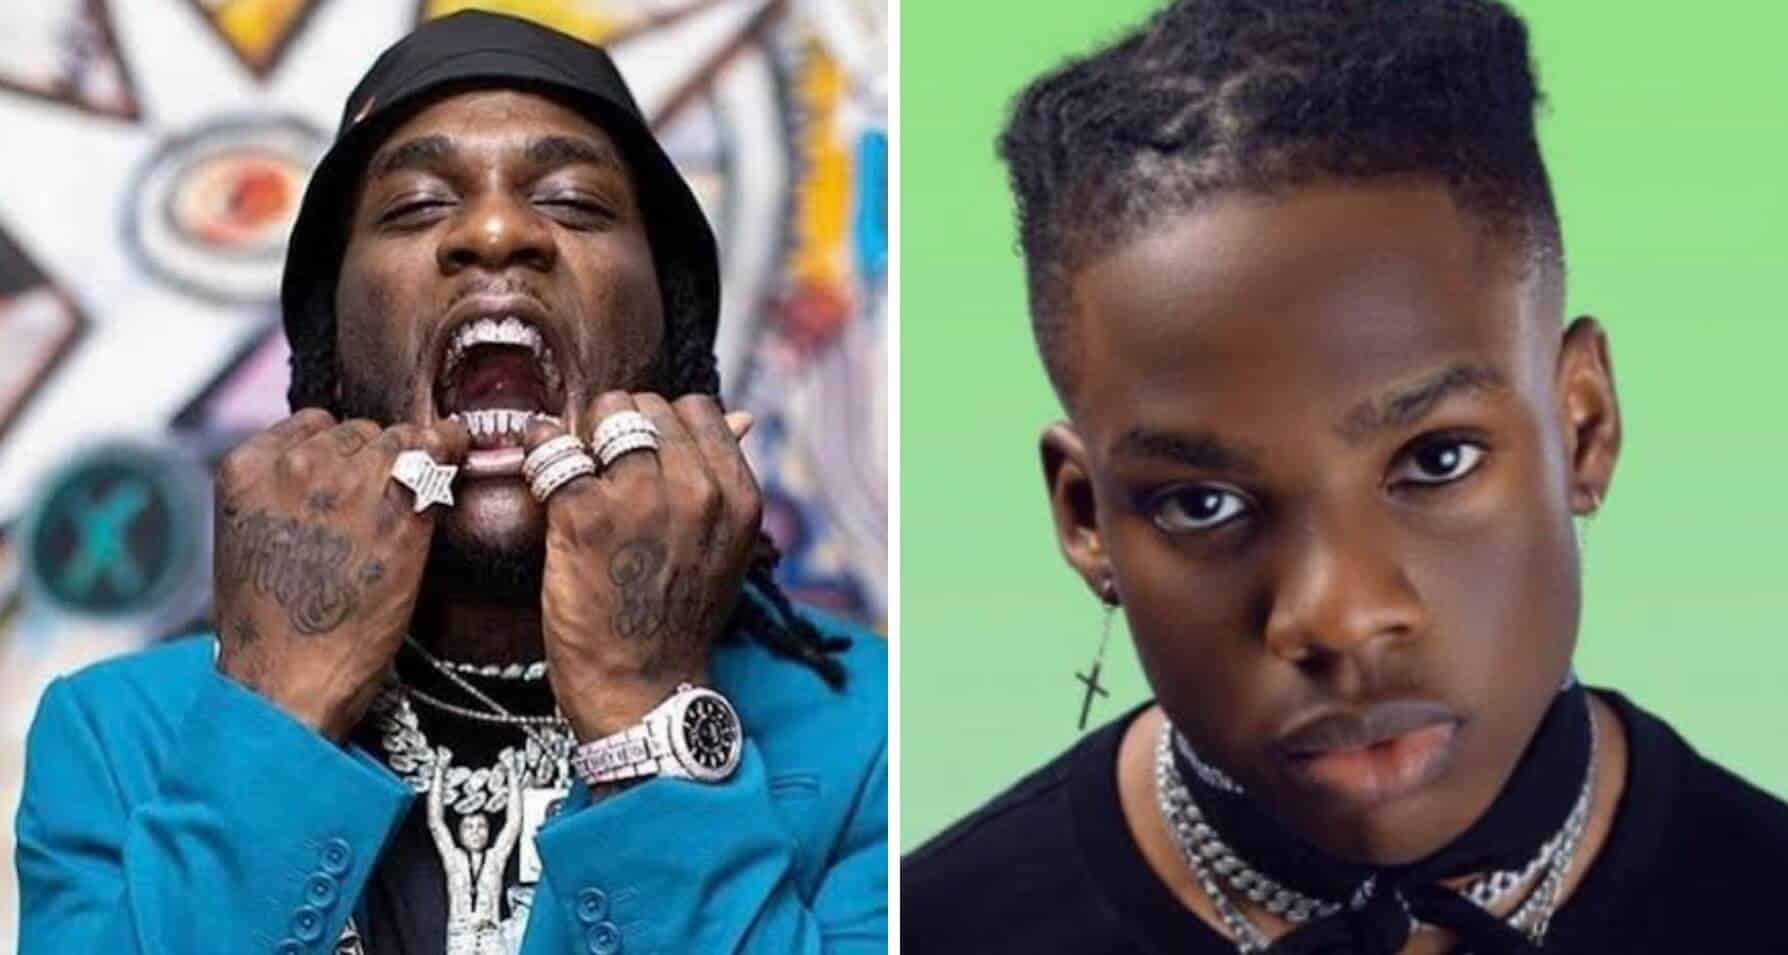 Burna Boy & Rema nominated for Best International Act at MOBO Awards 2020